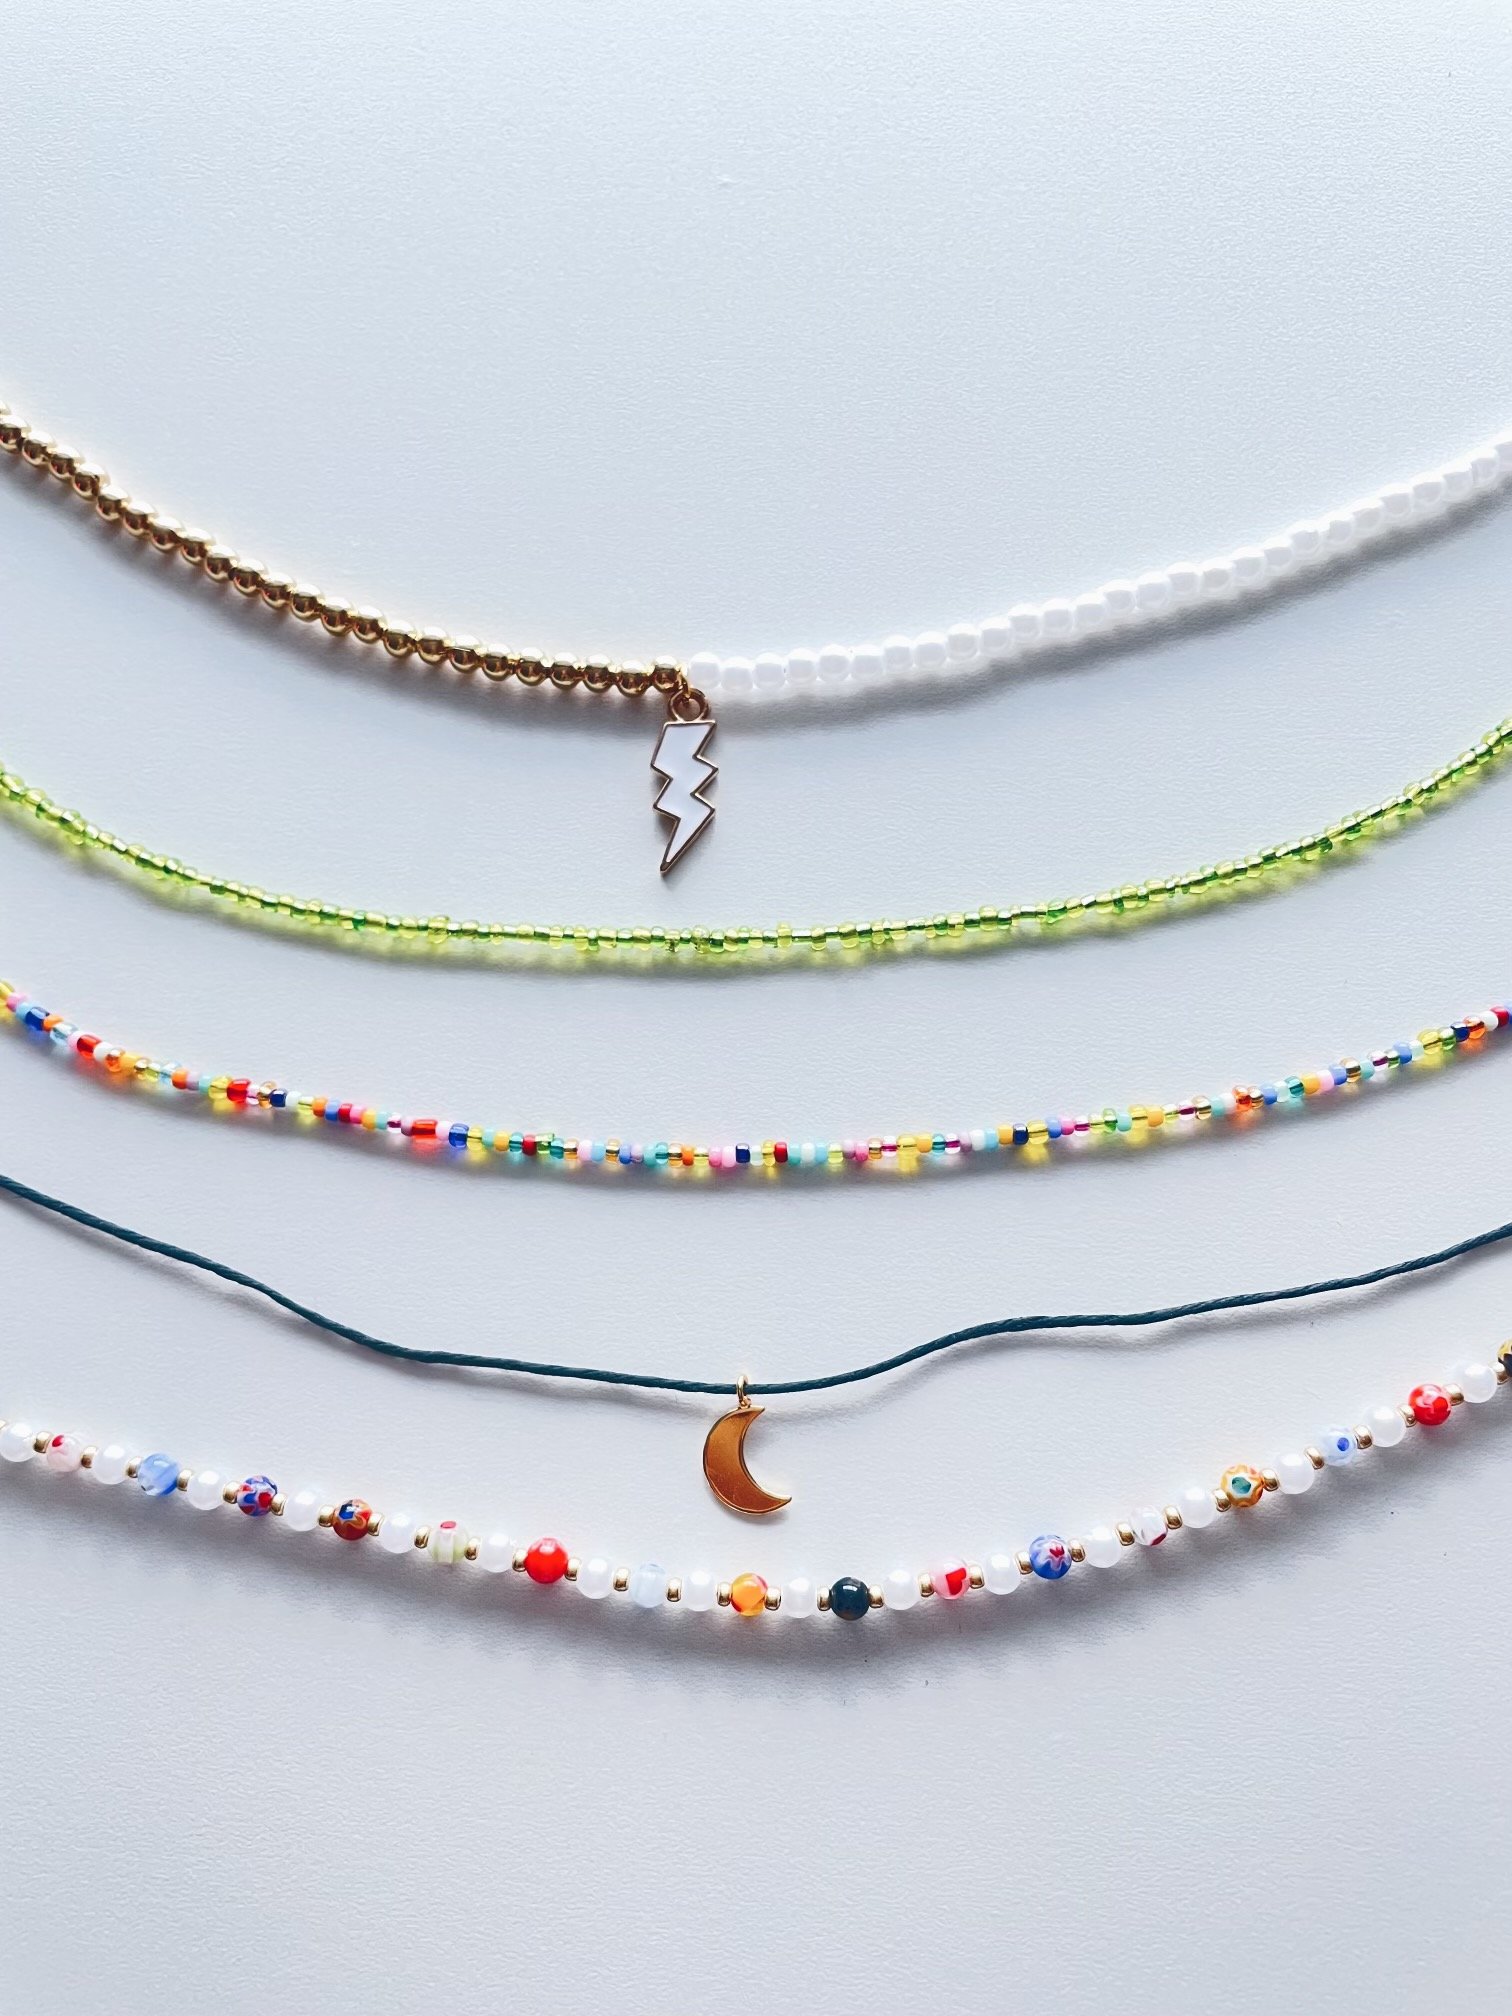 Image of beaded necklaces